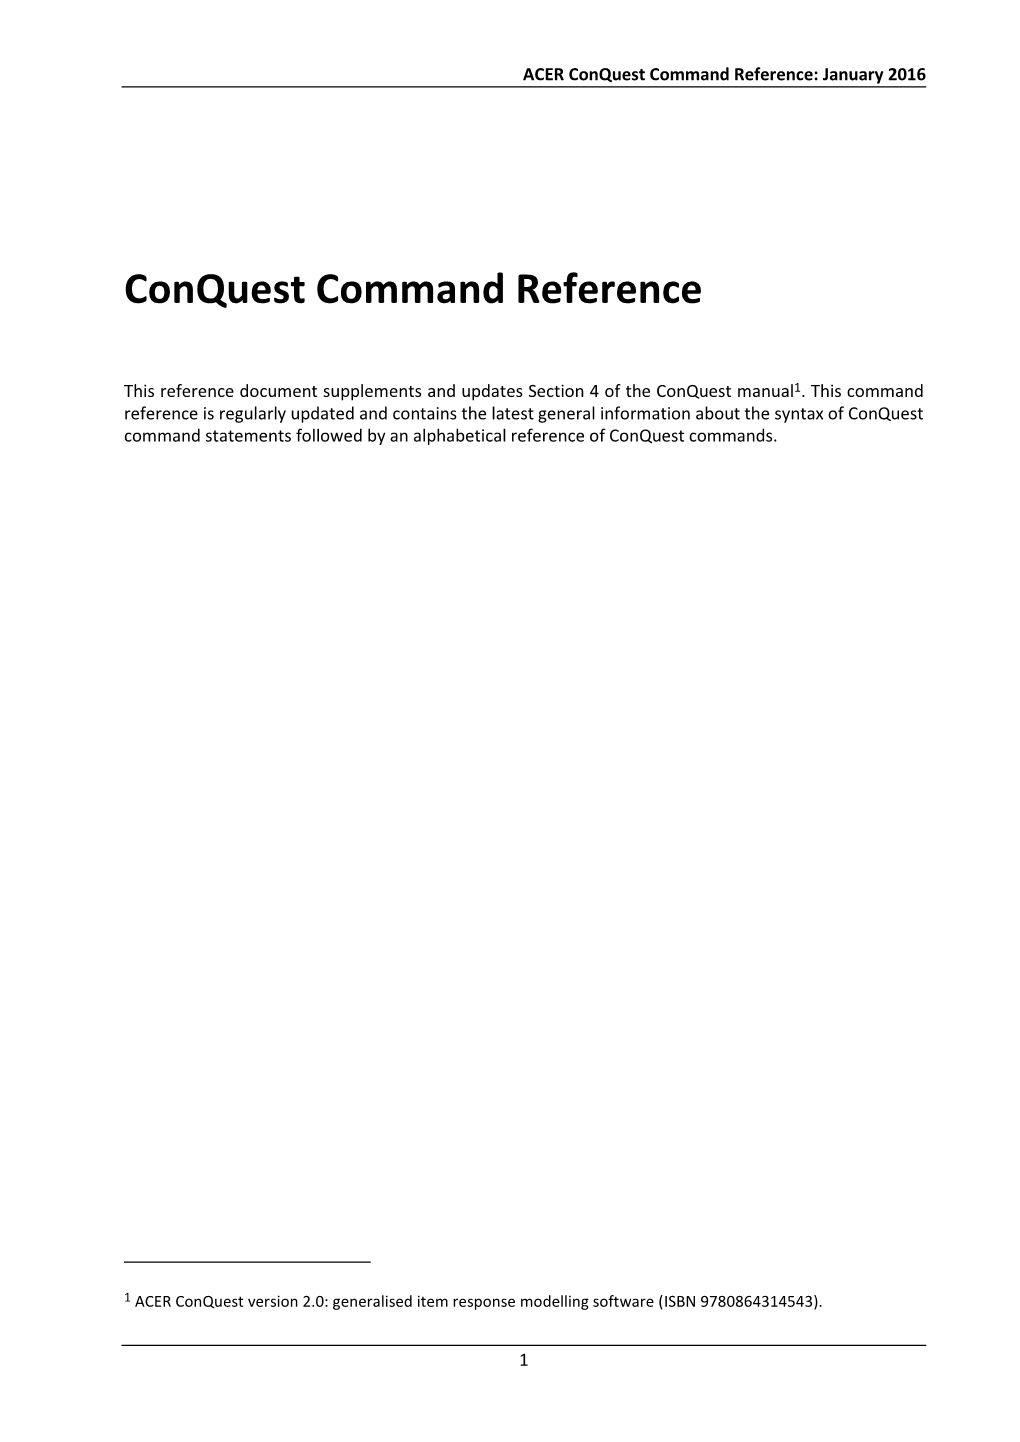 Conquest Command Reference: January 2016